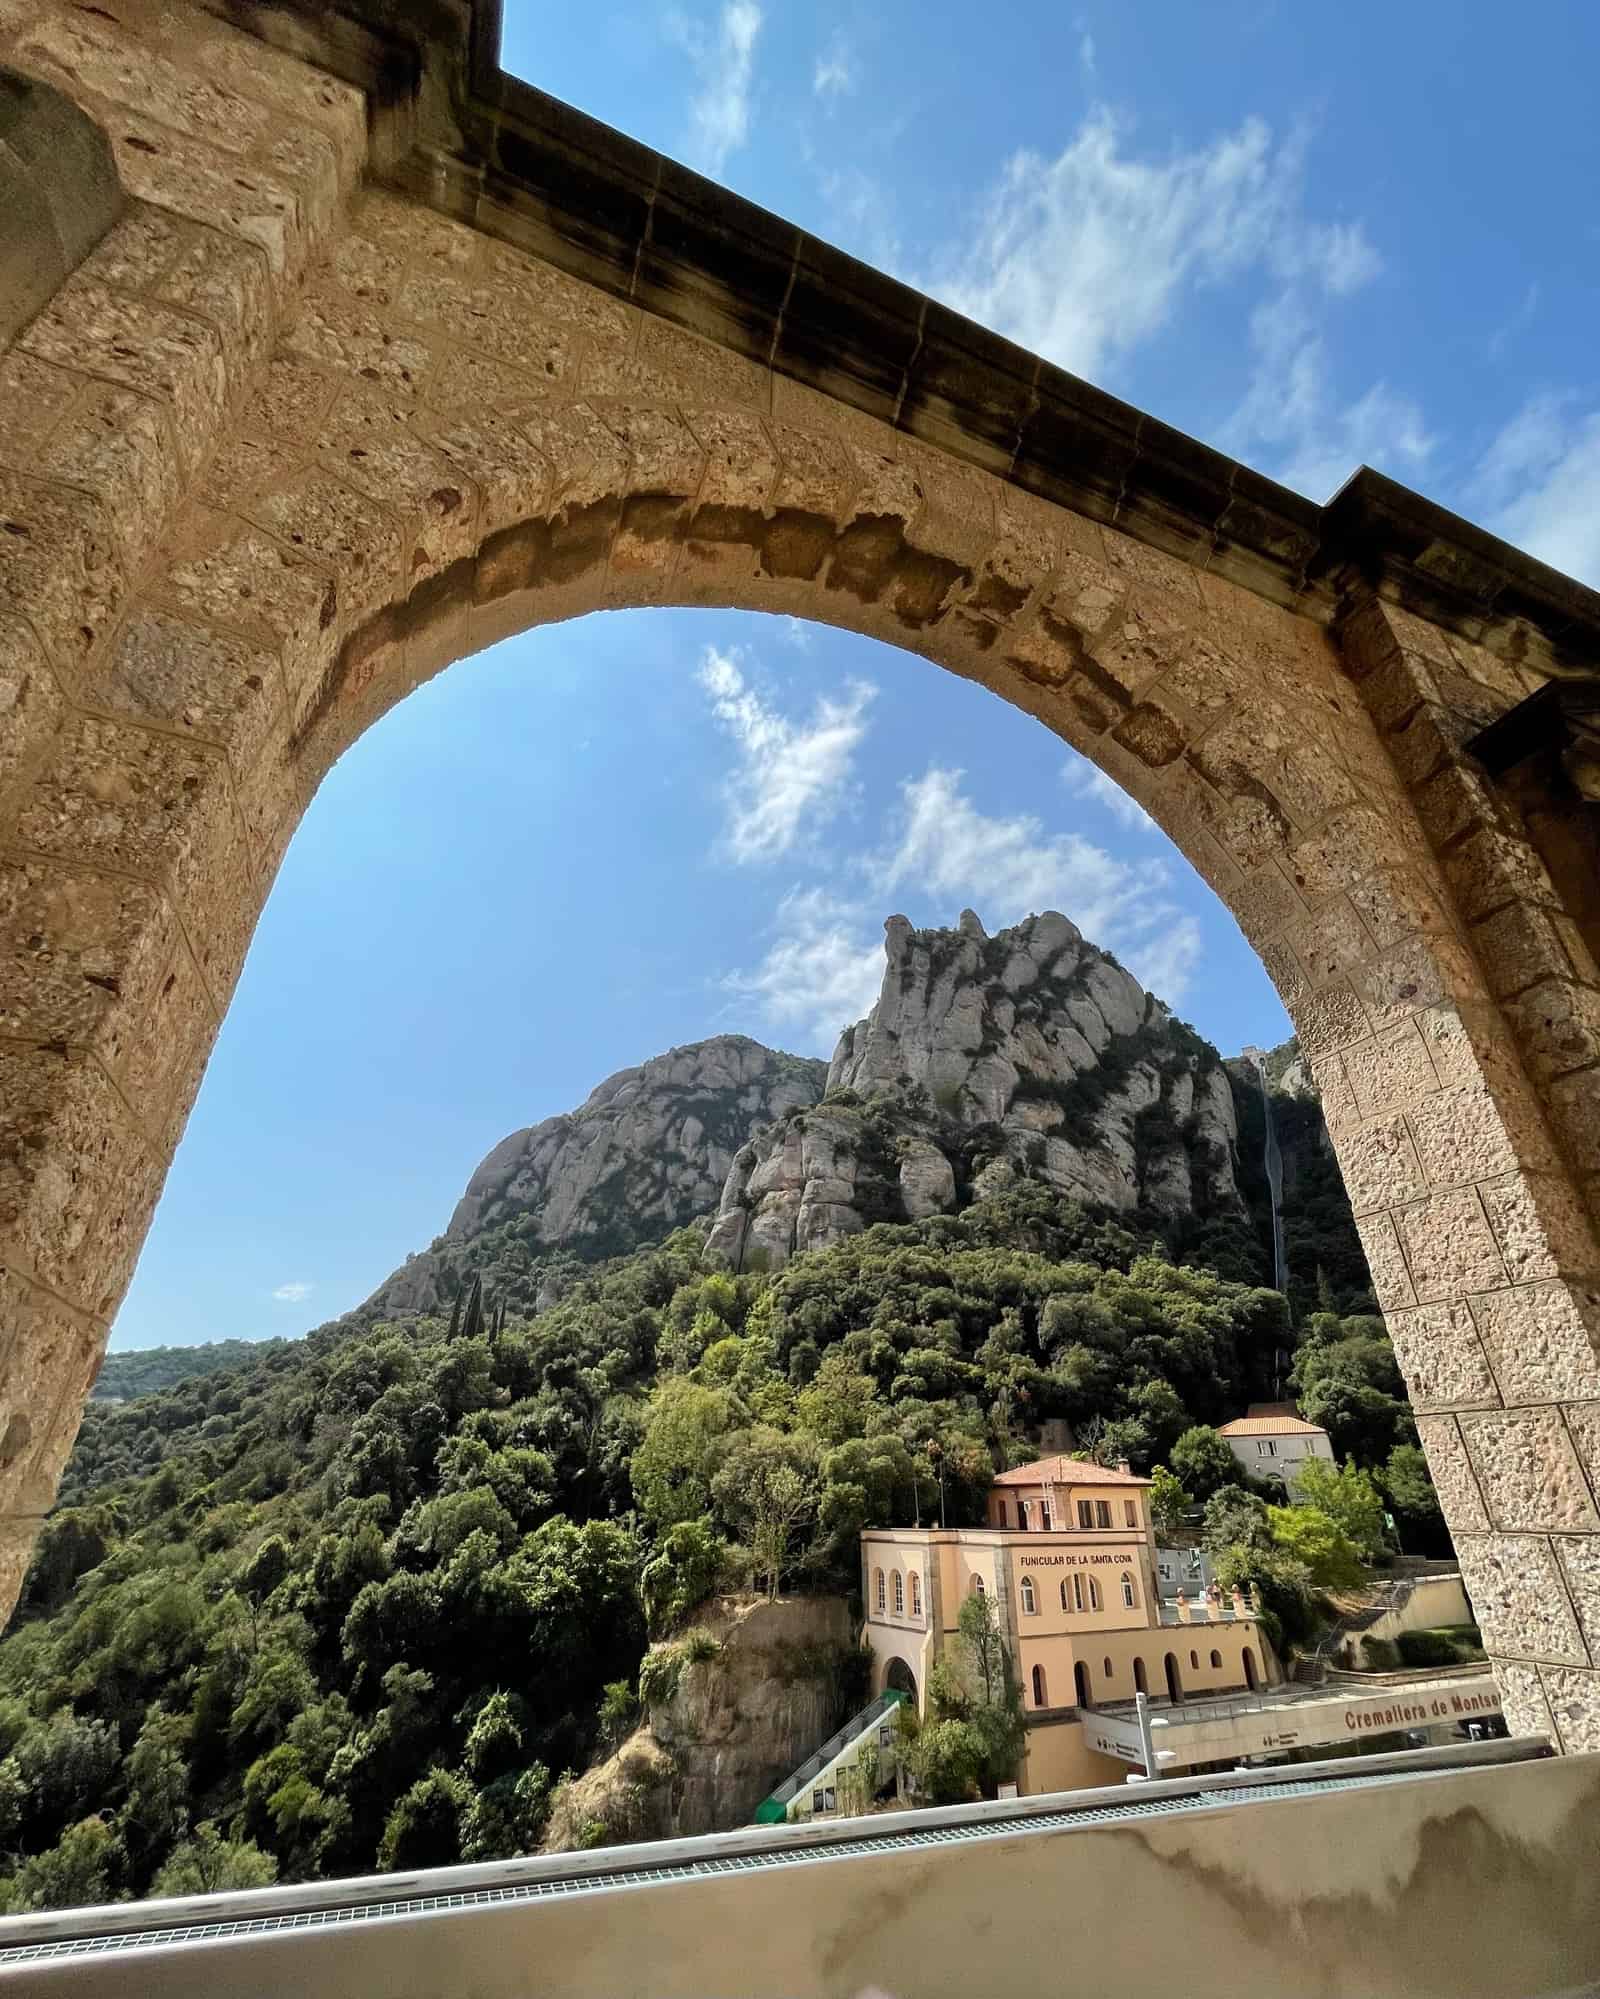 A beautiful view of the Montserrat mountain peak through the ruins of an arch building